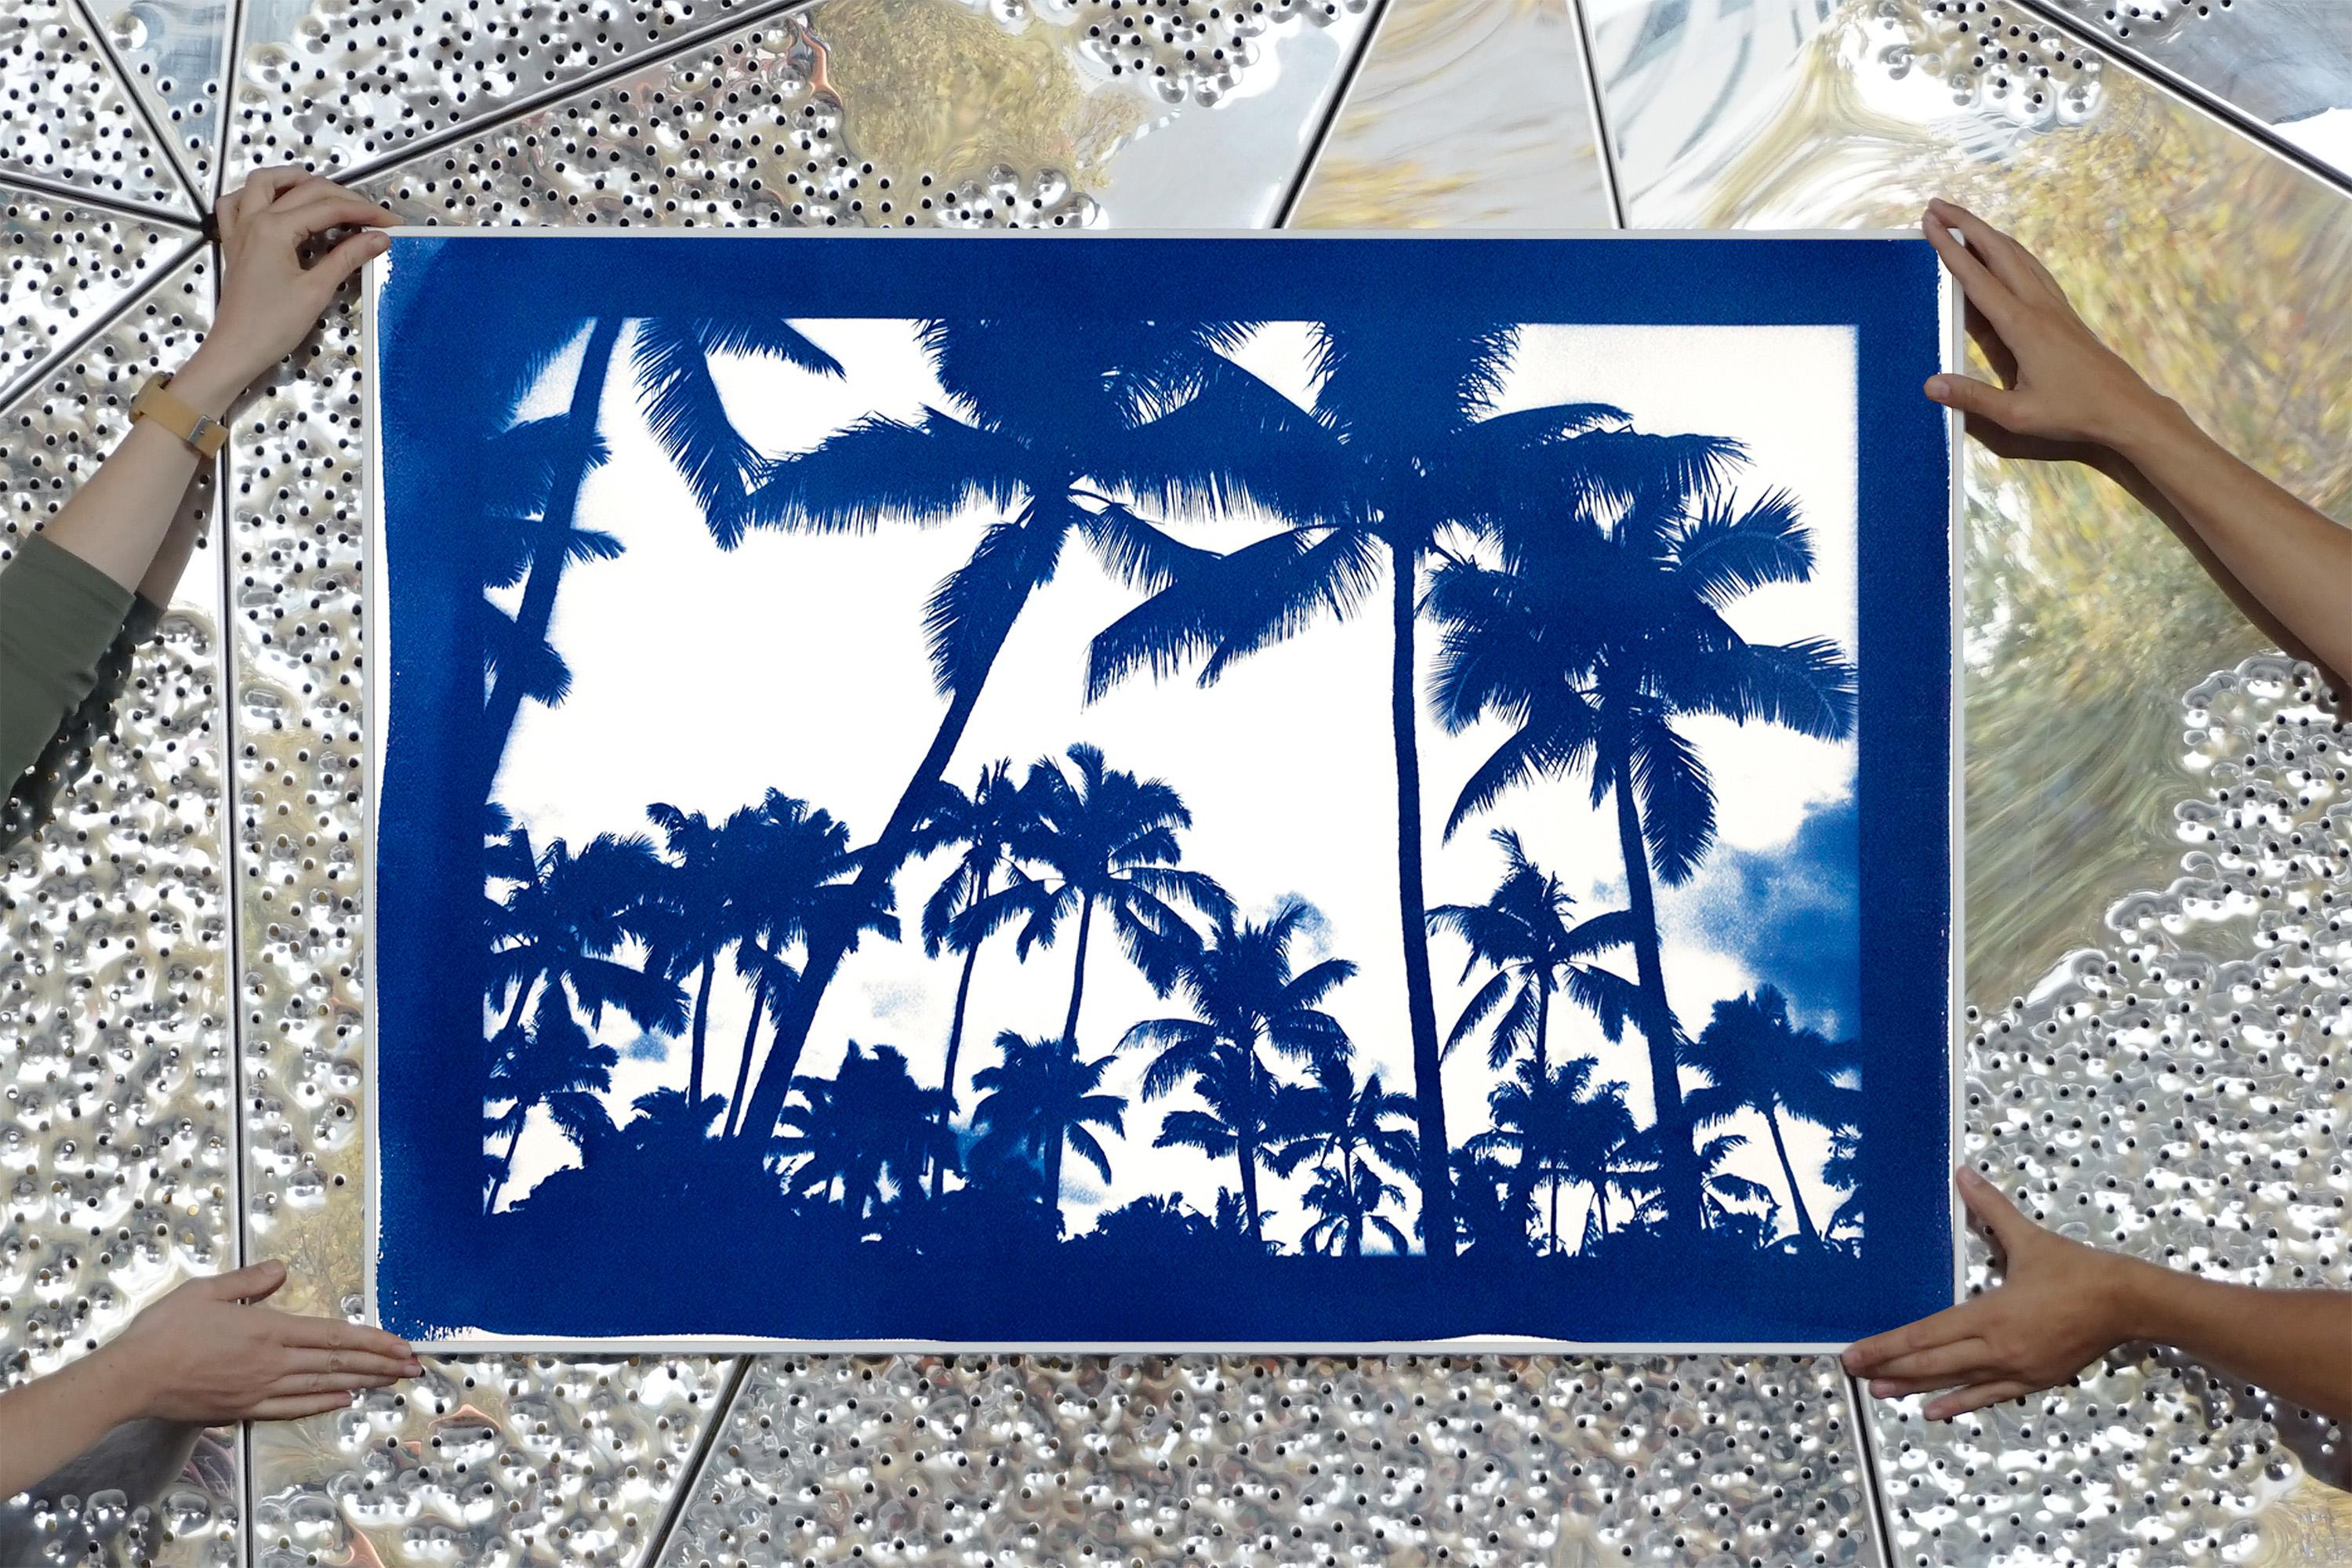 Acapulco Palm Sunset, Blue Border, Cyanotype on Watercolor Paper, 100x70cm 2